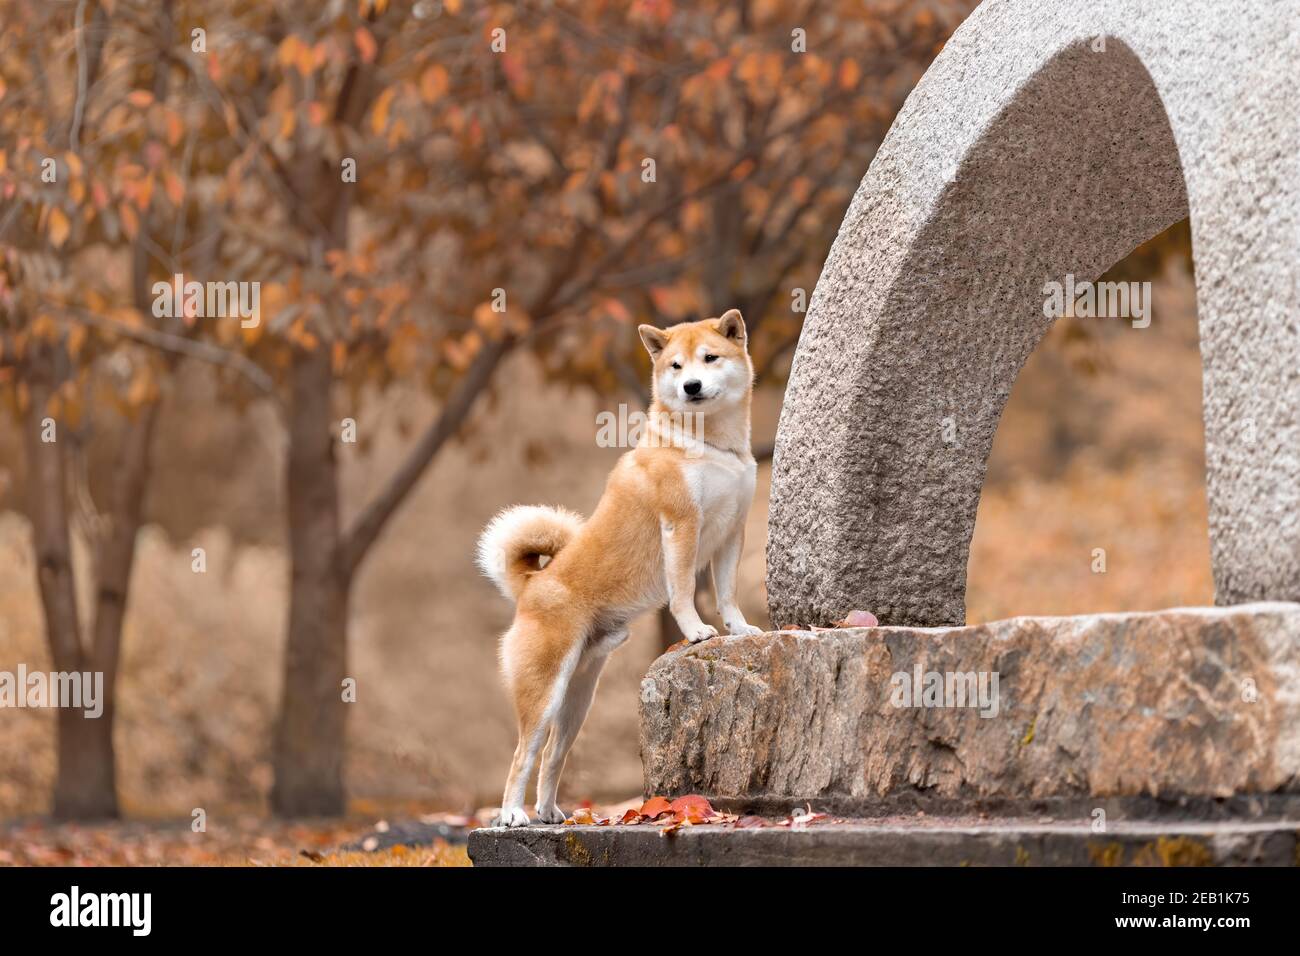 Cute ginger dog of shiba inu breed standing in touch command on stone japanese lantern in traditional garden at autumn Stock Photo